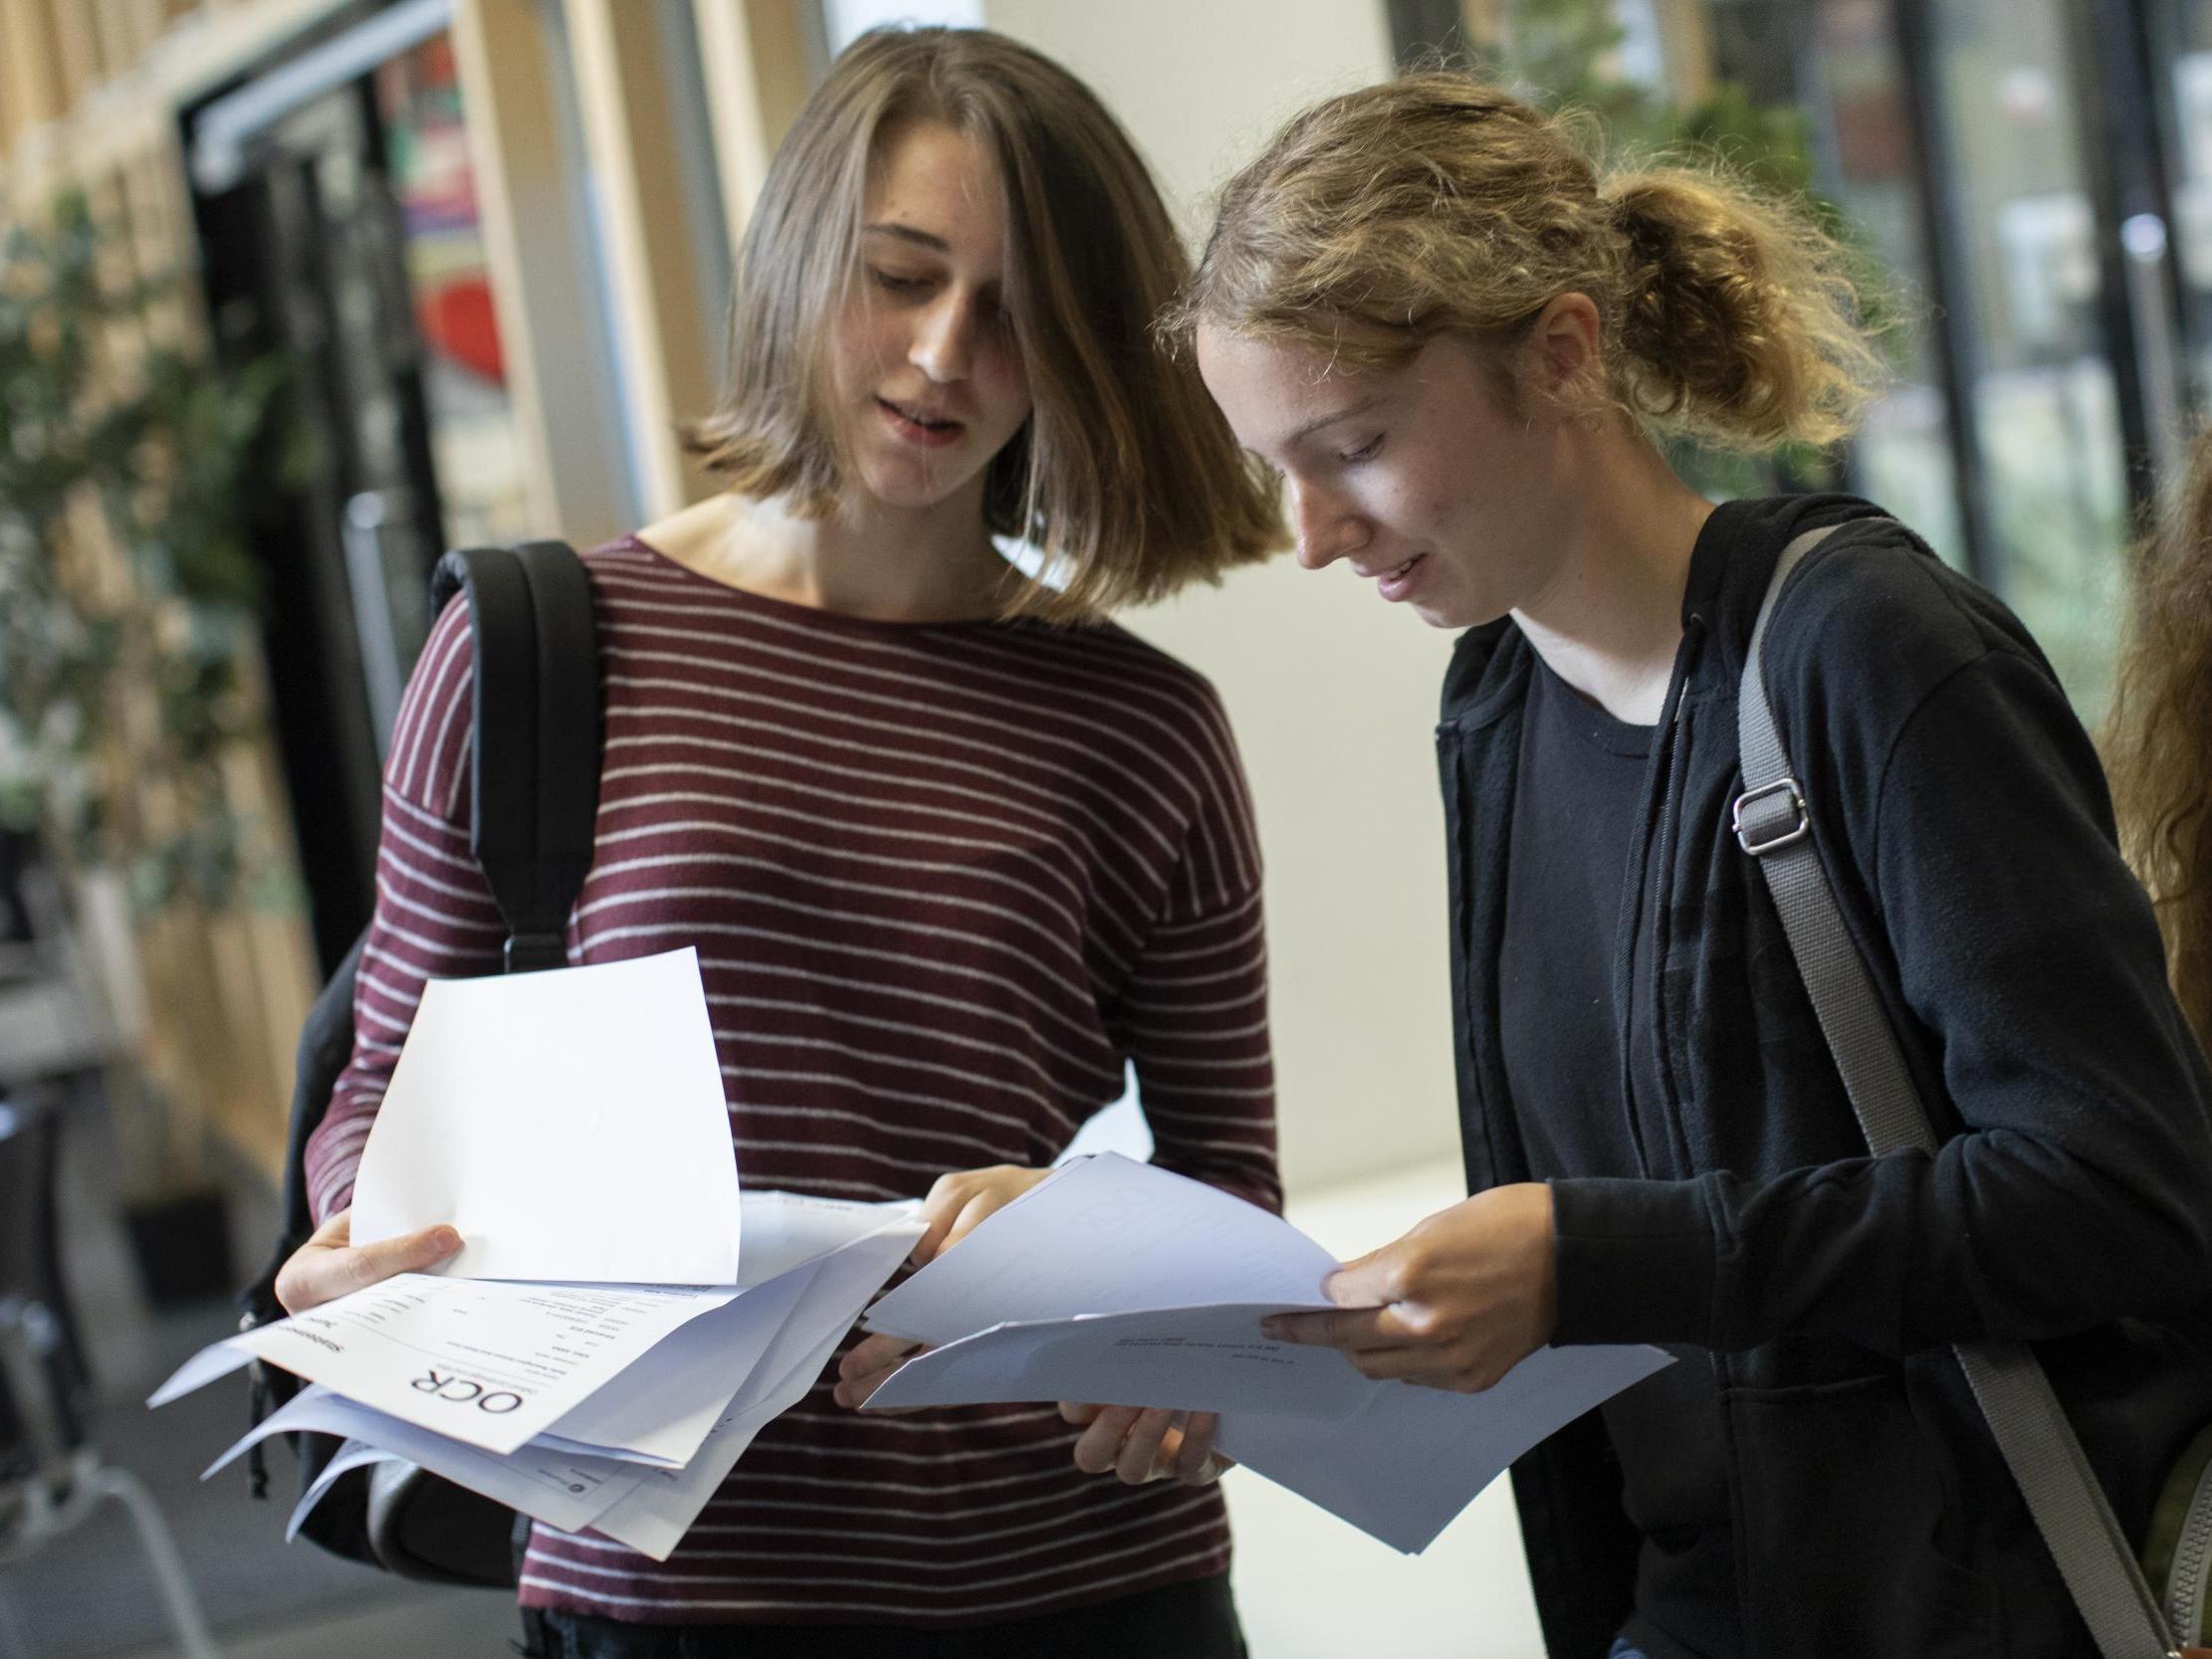 GCSE and A-Level results expected to be higher this summer after exams cancelled